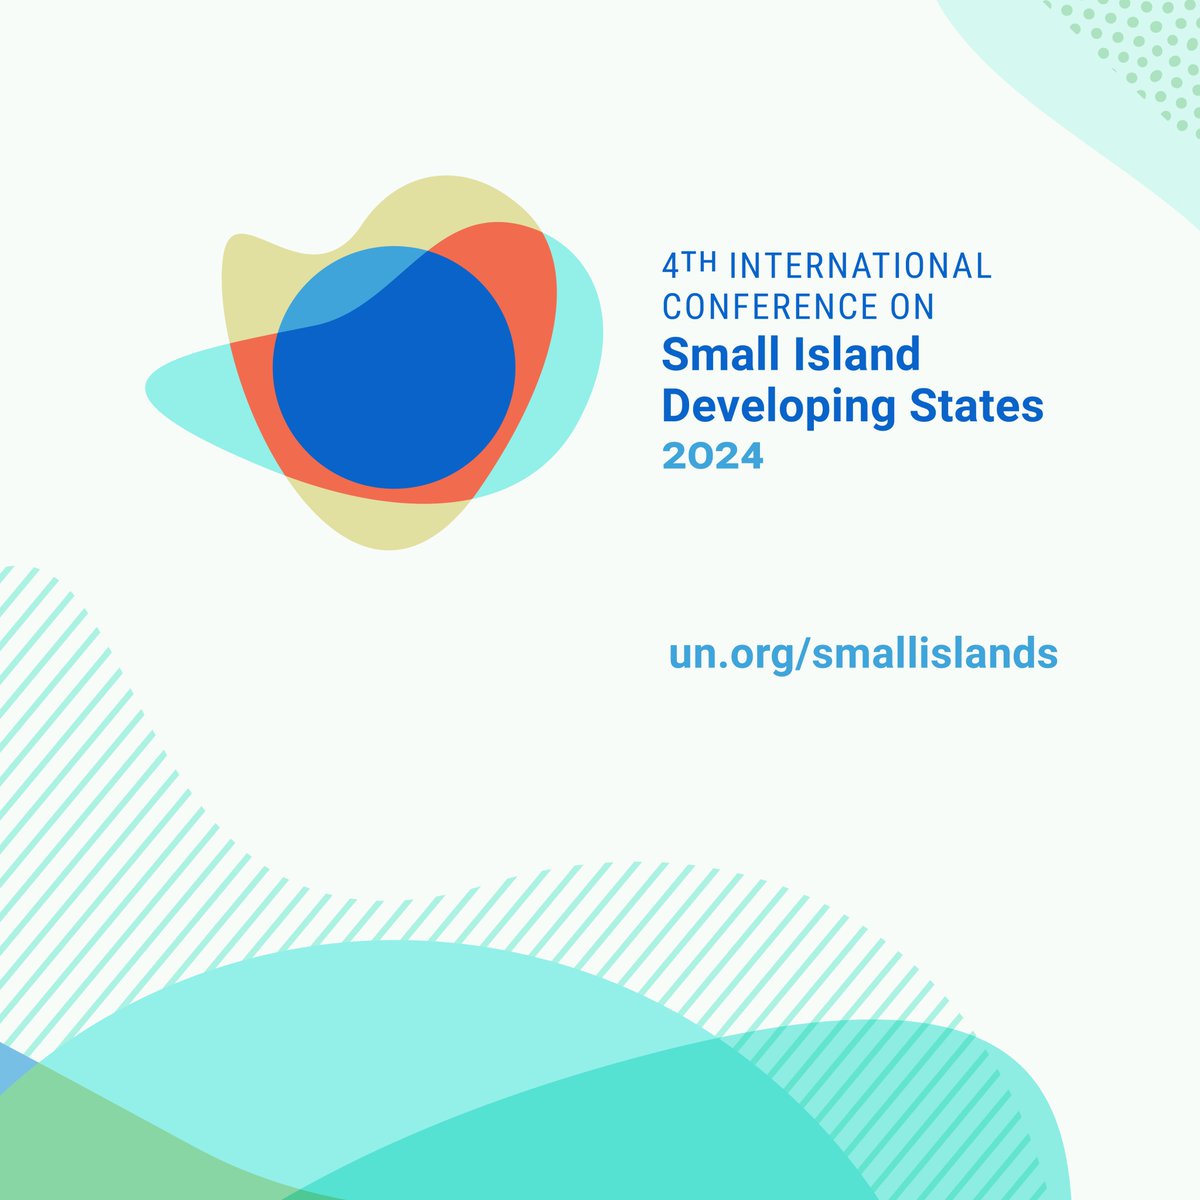 Save the Date: join us from May 27-30 for #SIDS4, where policymakers, experts, and stakeholders converge to address the unique challenges faced by Small Island Developing States. Let's build resilience and prosperity together! 🏝️ un.org/smallislands